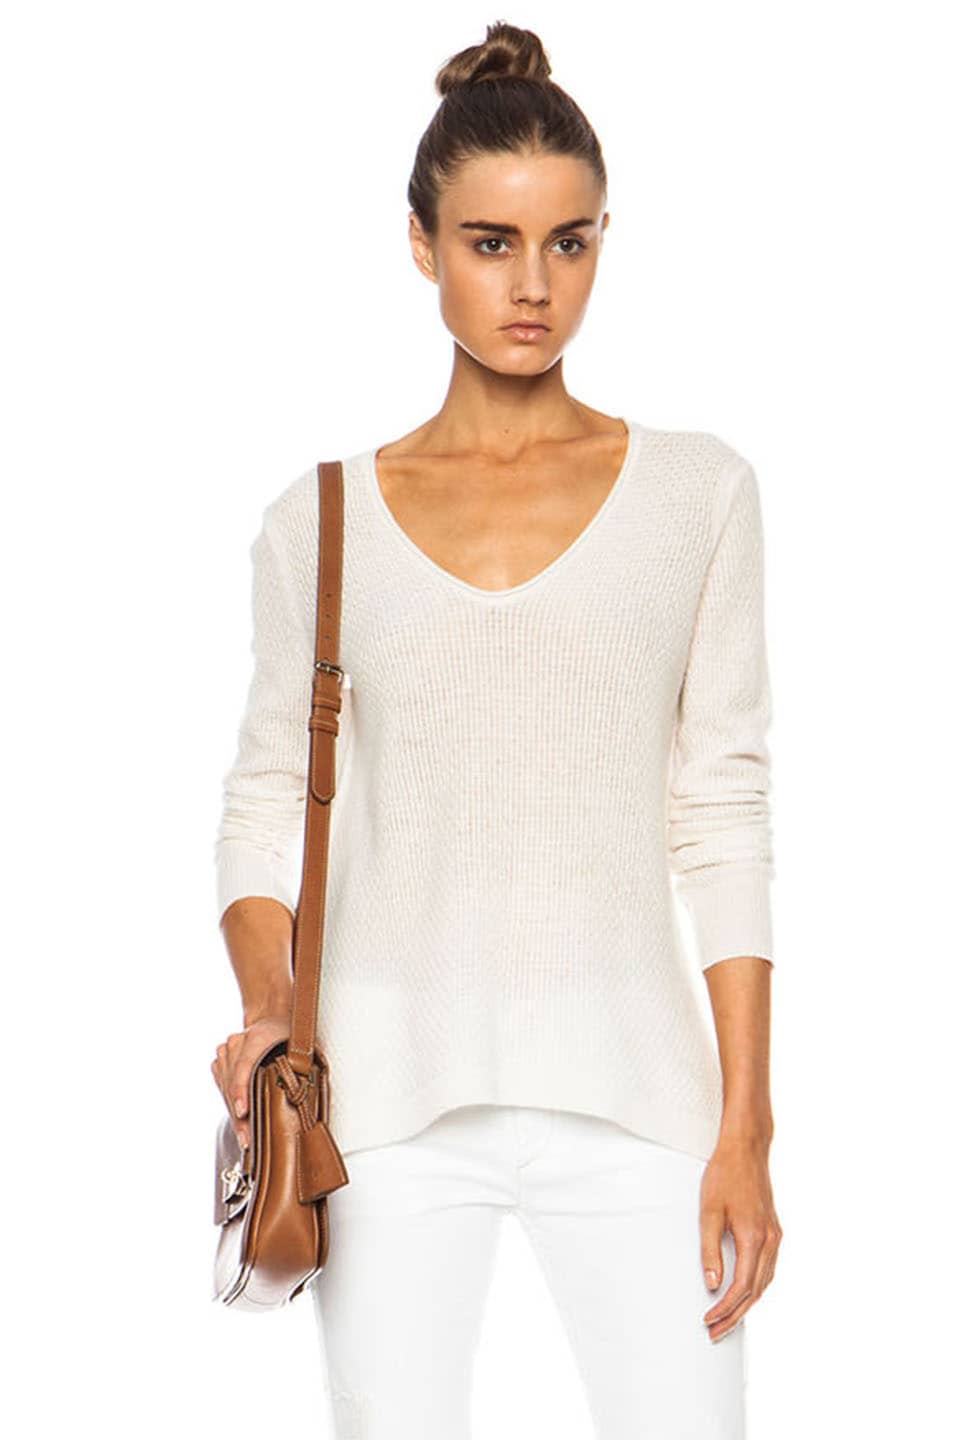 Inhabit Cashmere Lace V Neck Sweater in Ivory | FWRD